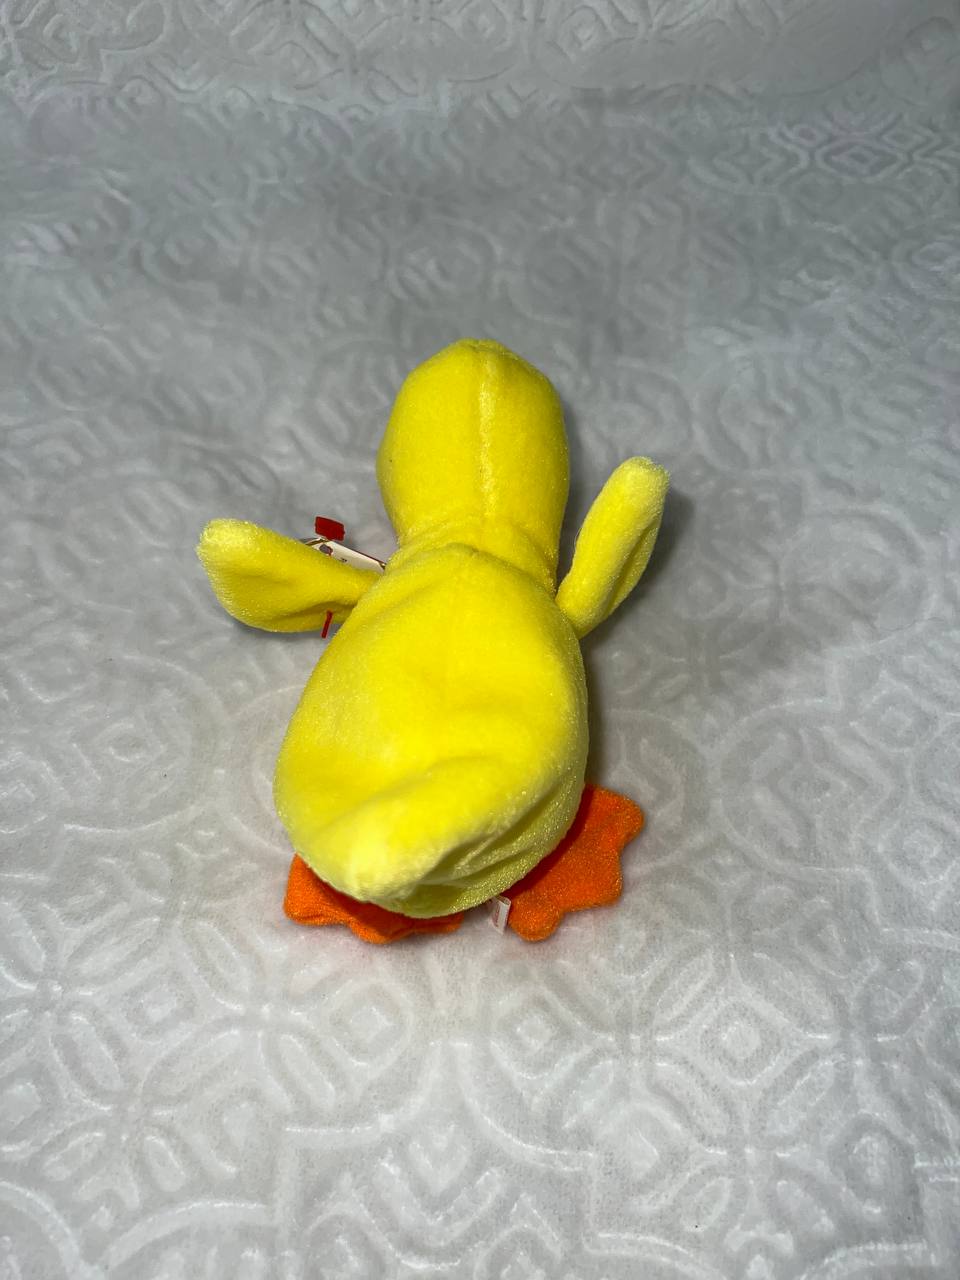 *RARE* MINT Quackers Beanie Baby 1994 With Tag